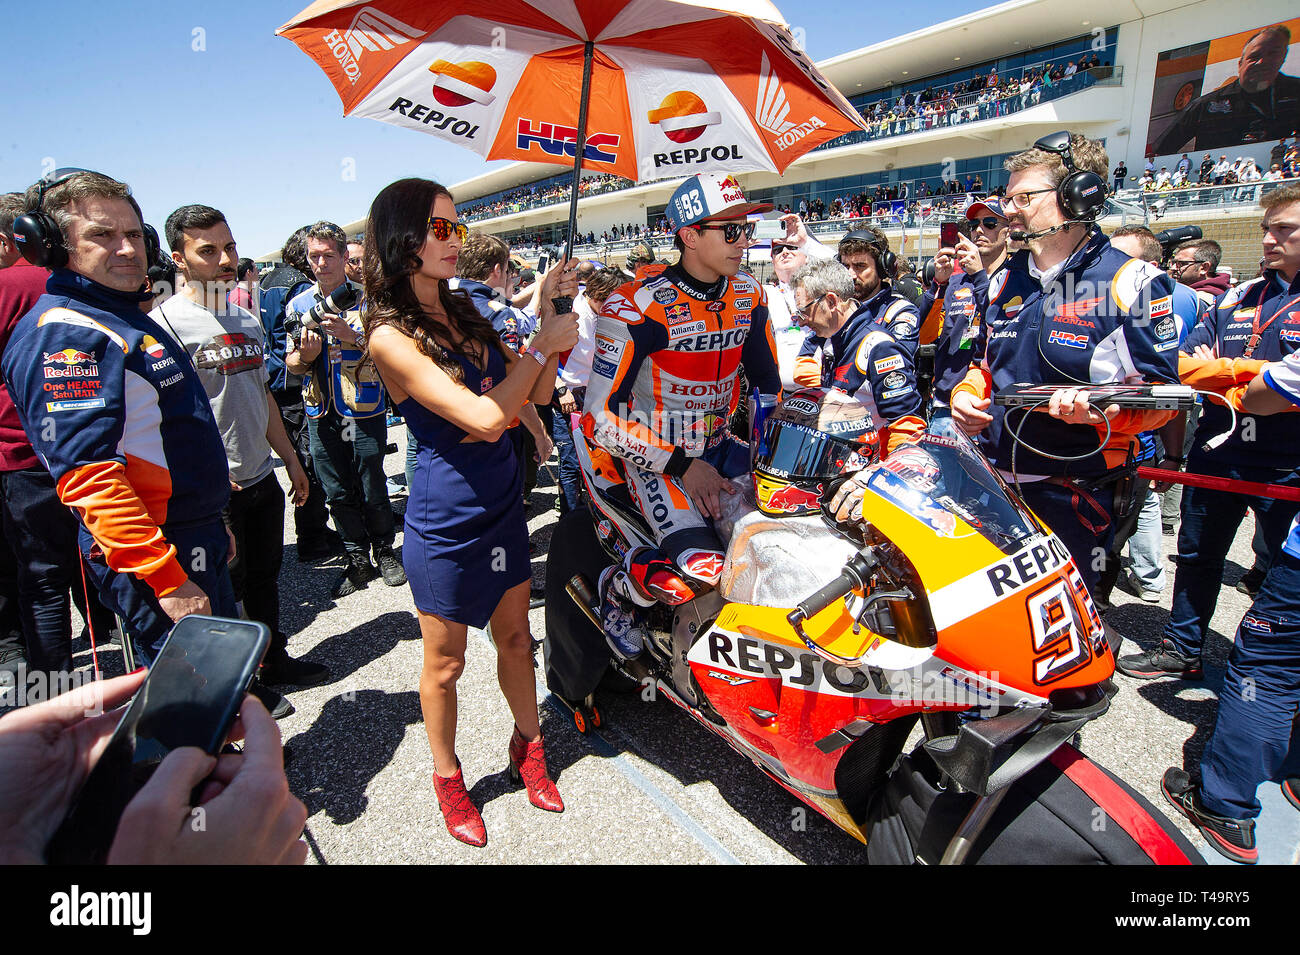 Austin, Texas, USA. 14th Apr 2019. April 14, 2019: Marc Marquez #93 with  Repsol Honda Team sitting calm before the start of the MotoGP Championship  at the Red Bull Grand Prix of